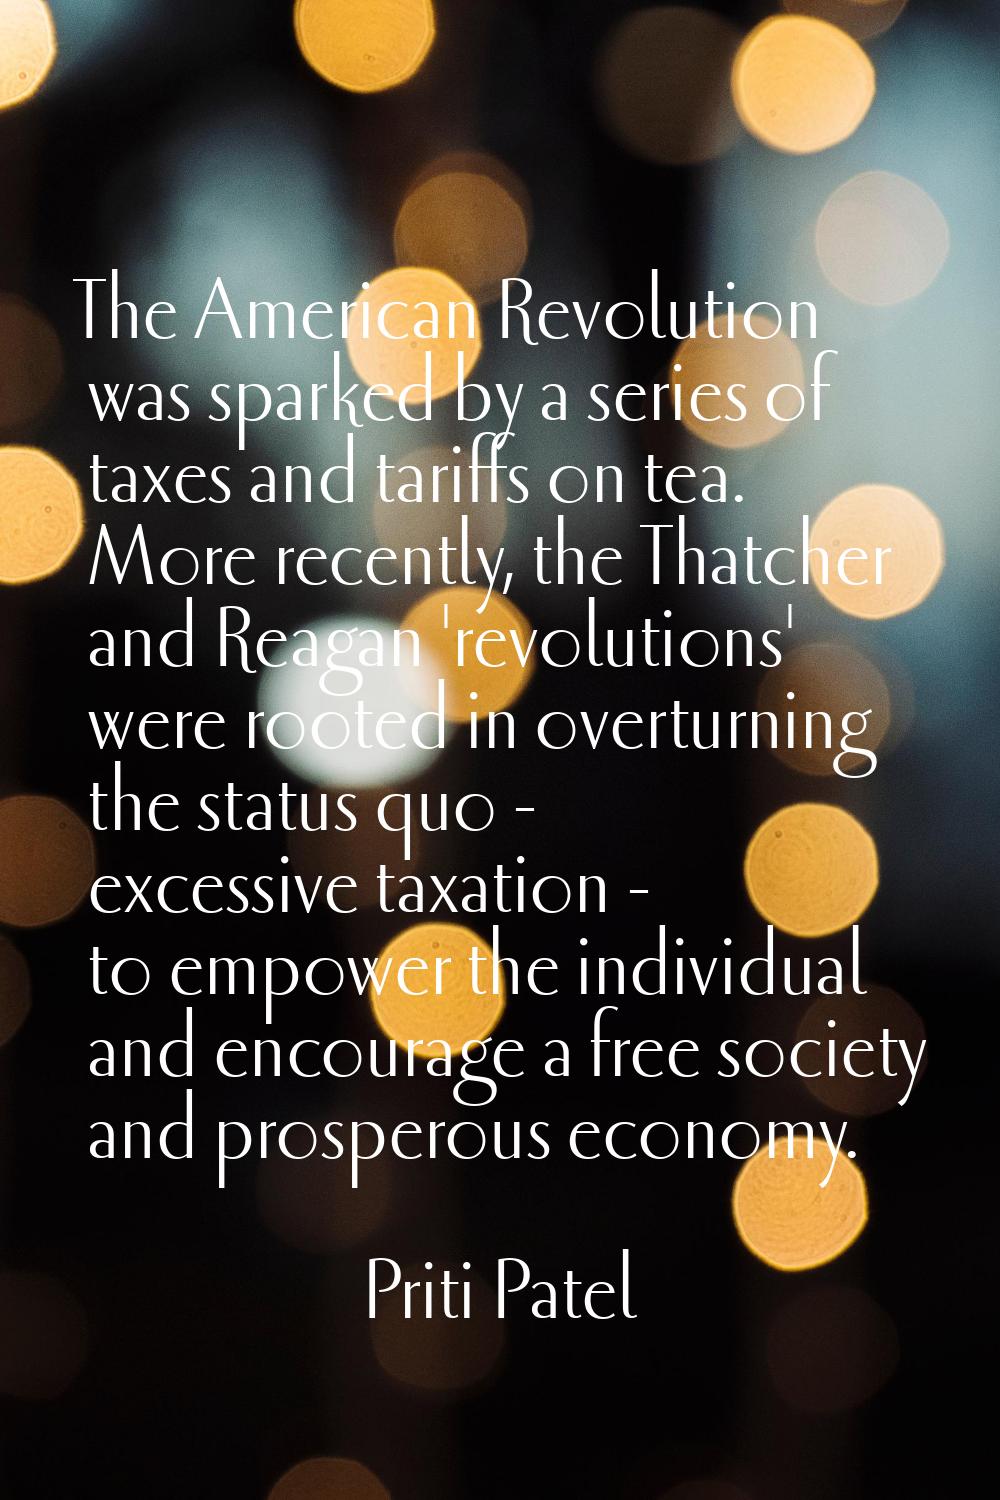 The American Revolution was sparked by a series of taxes and tariffs on tea. More recently, the Tha